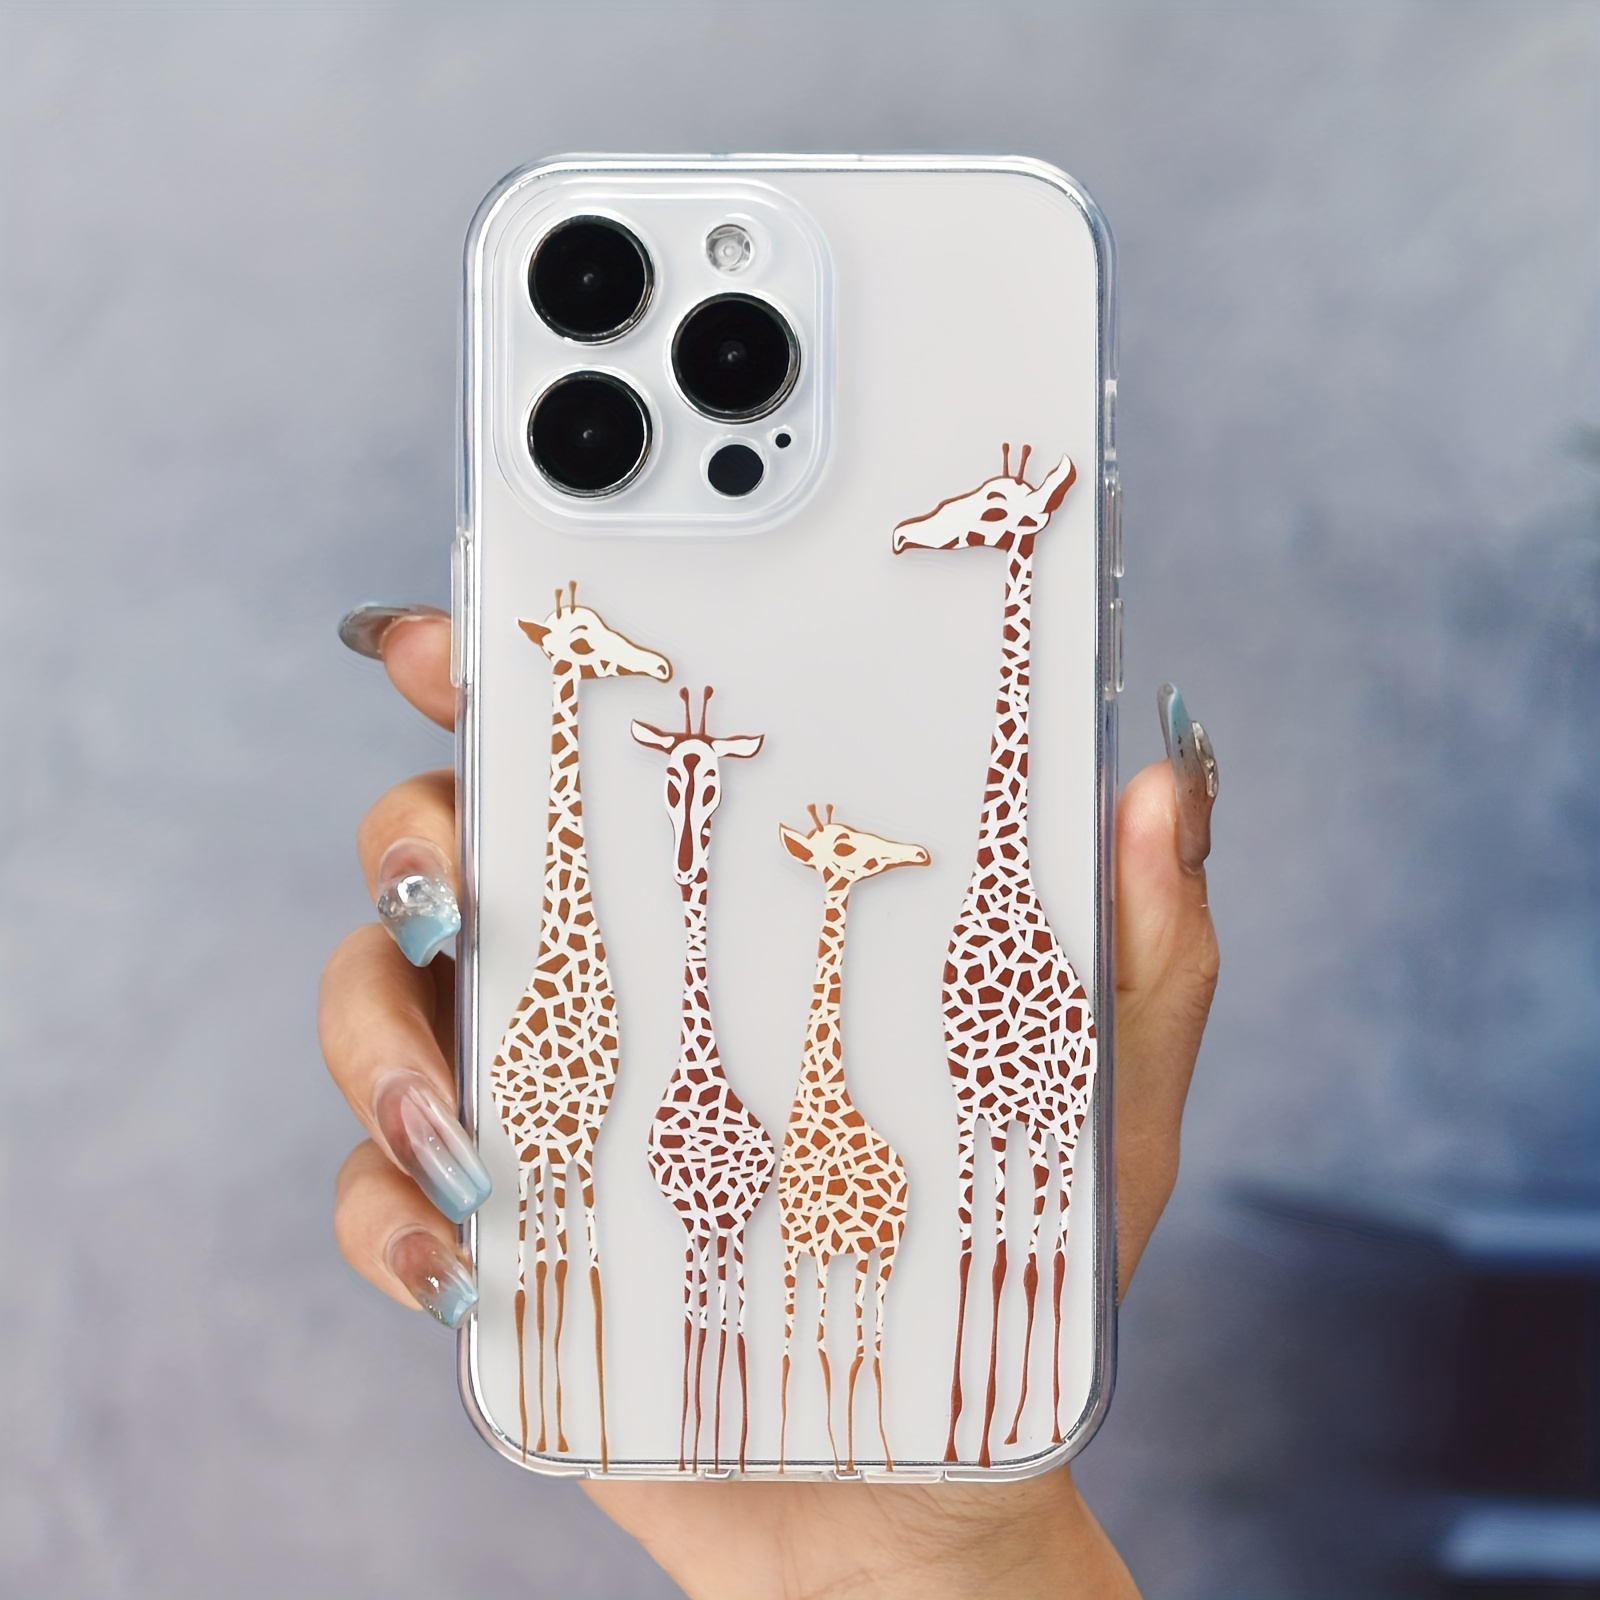 

Giraffe Pattern, 2.0 Transparent All-inclusive Thickened Protection, Dustproof Waterproof Tpu Soft Phone Case For Iphone7/8/11/12/13/14/x/xr/xs/plus/ Pro/pro Max/se2/mini Series